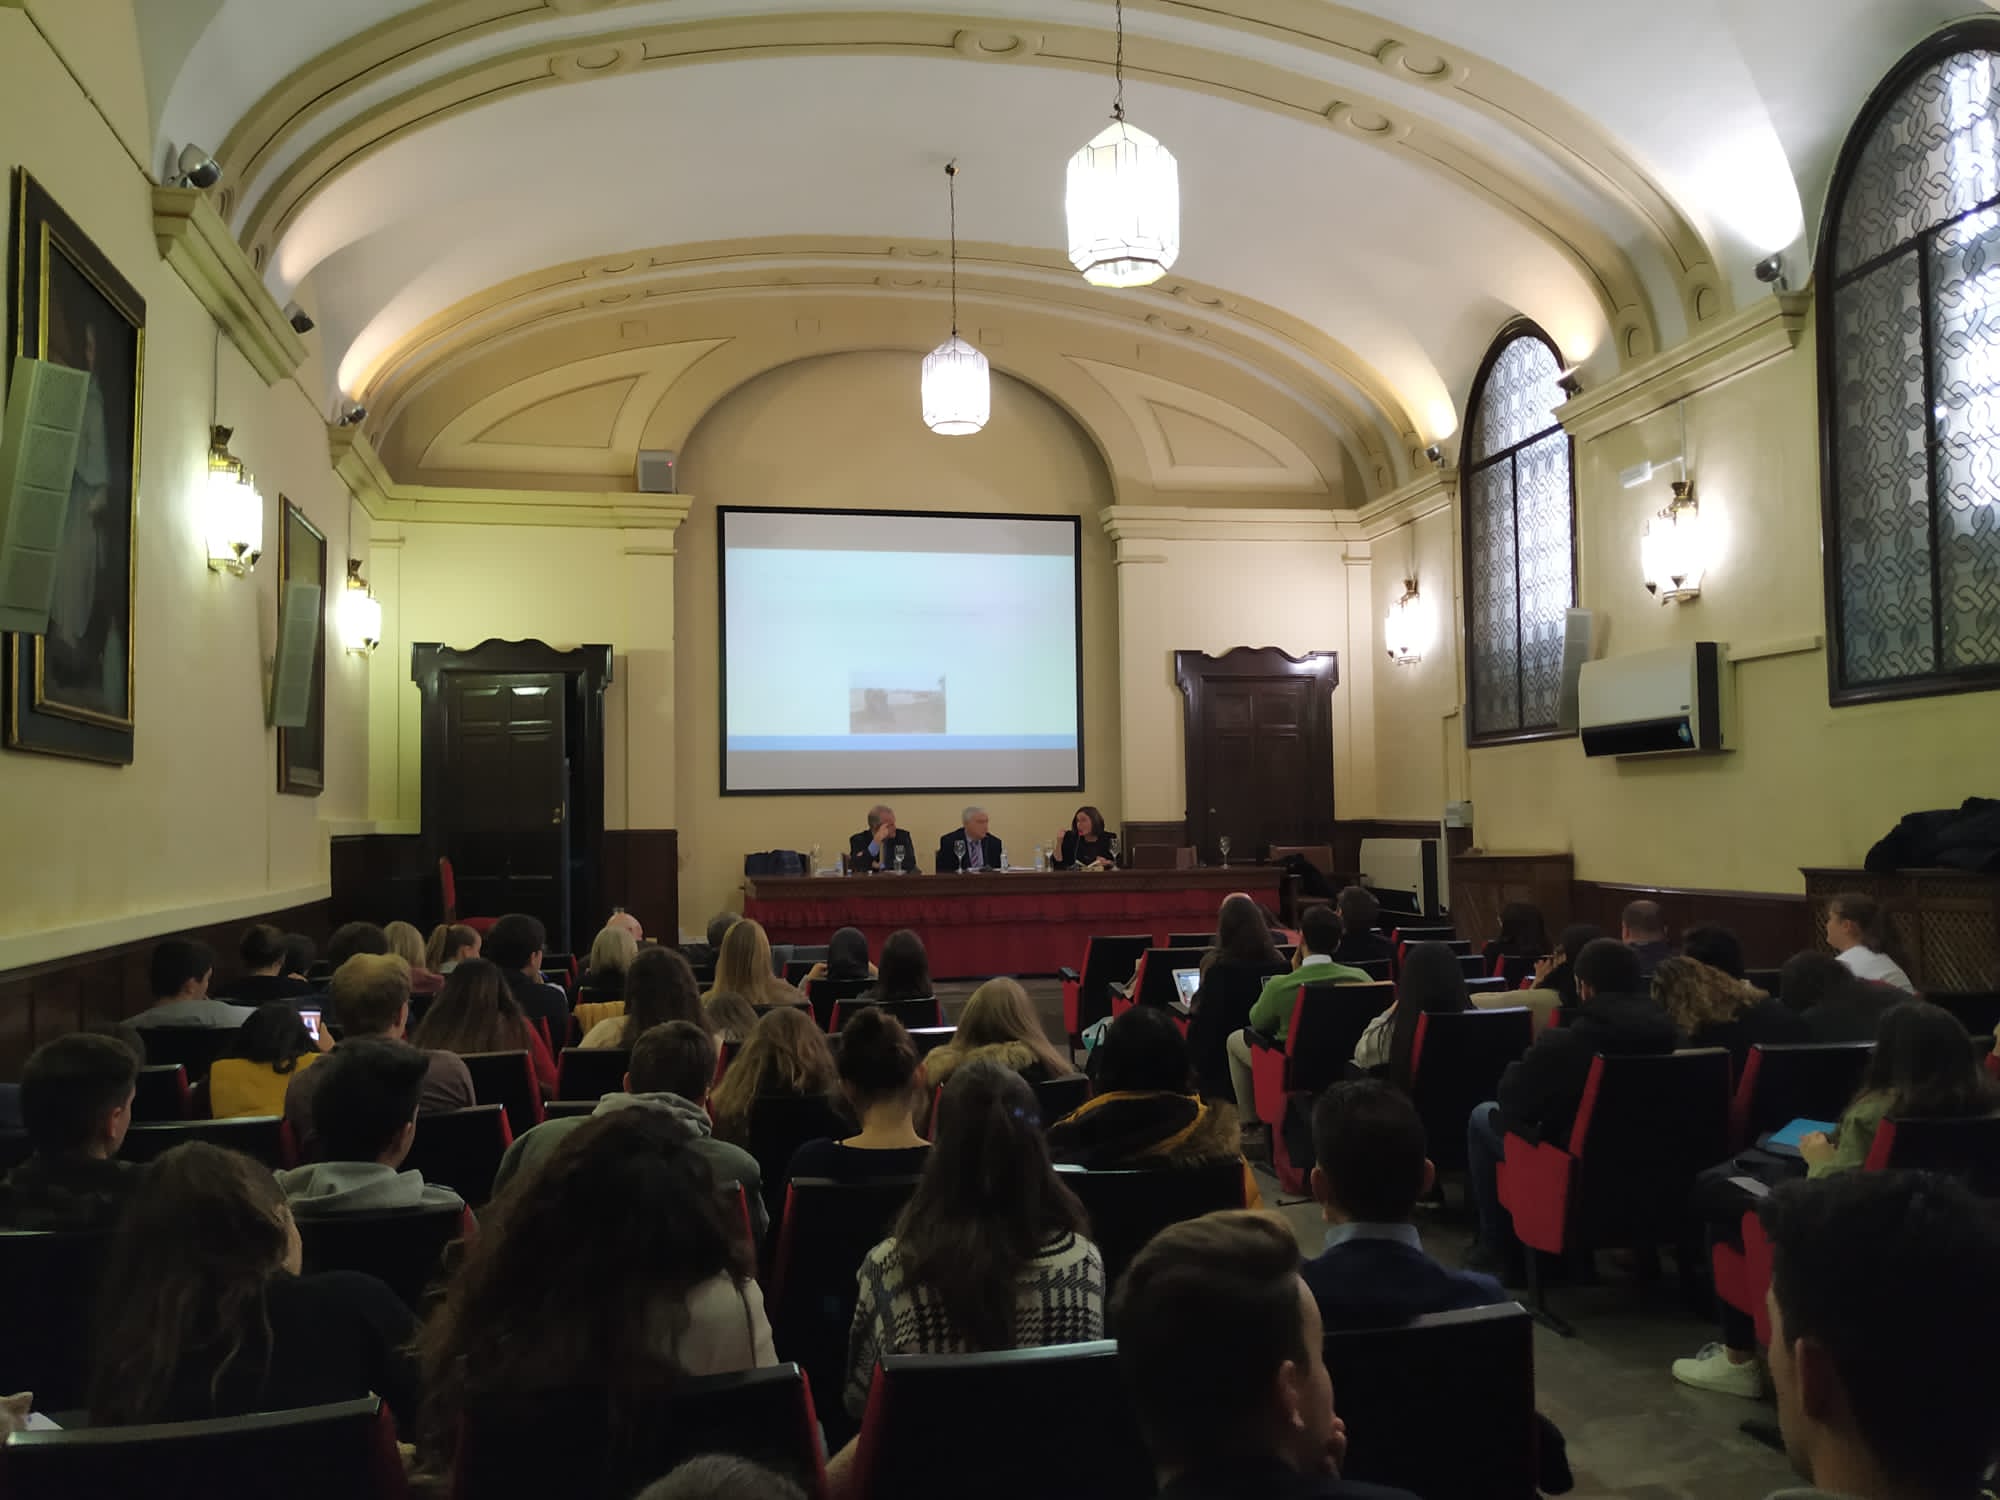 Image taken from the back of the room where you can see the intervention of professors Roldán Barbero and Fernández Arribas